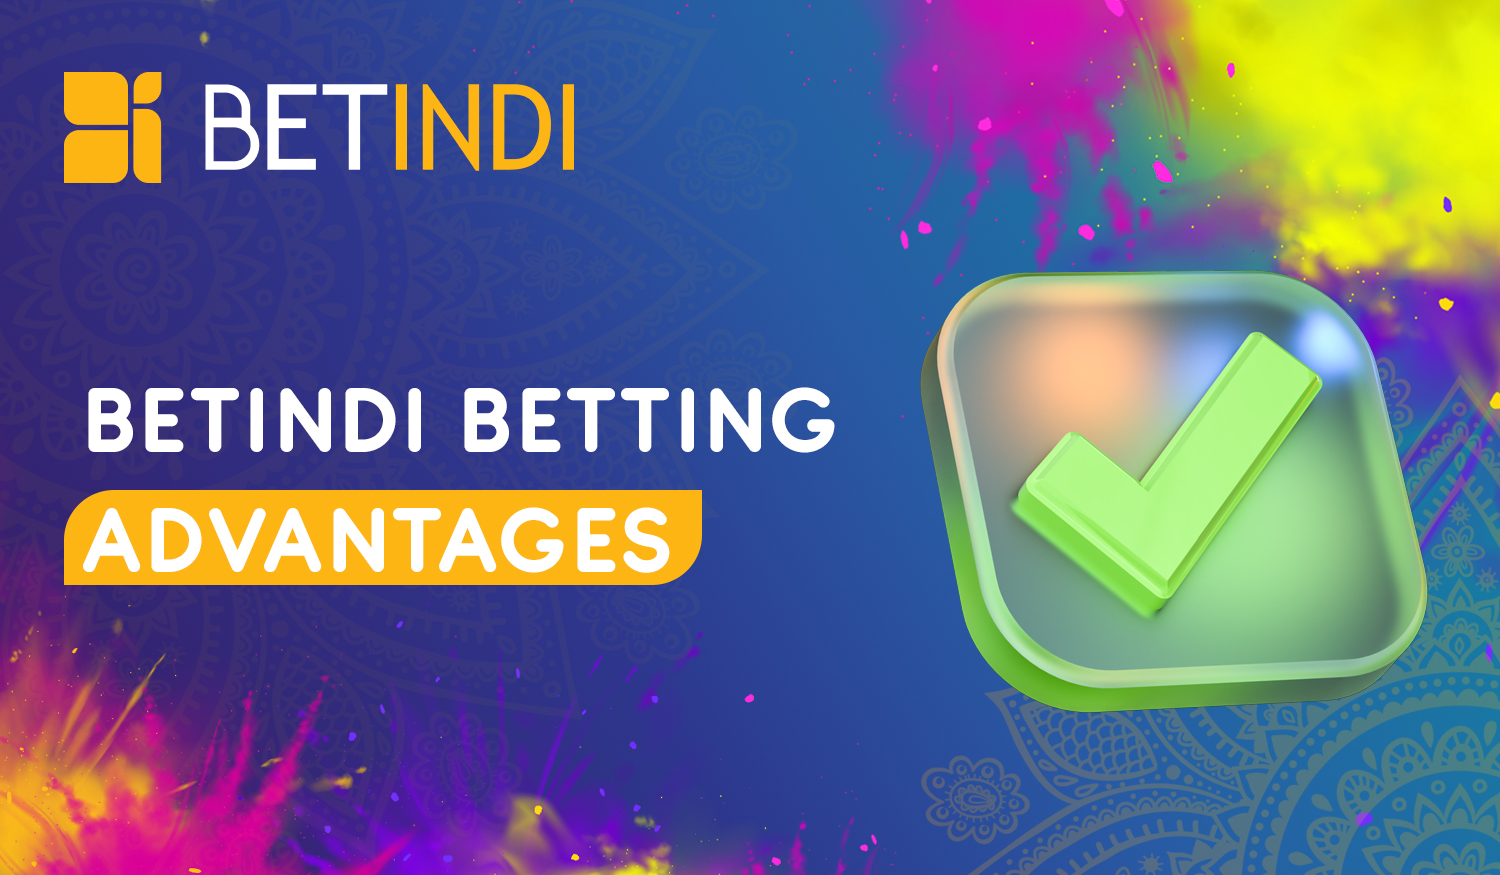 Main advantages of Betindi bookmaker for Indian users